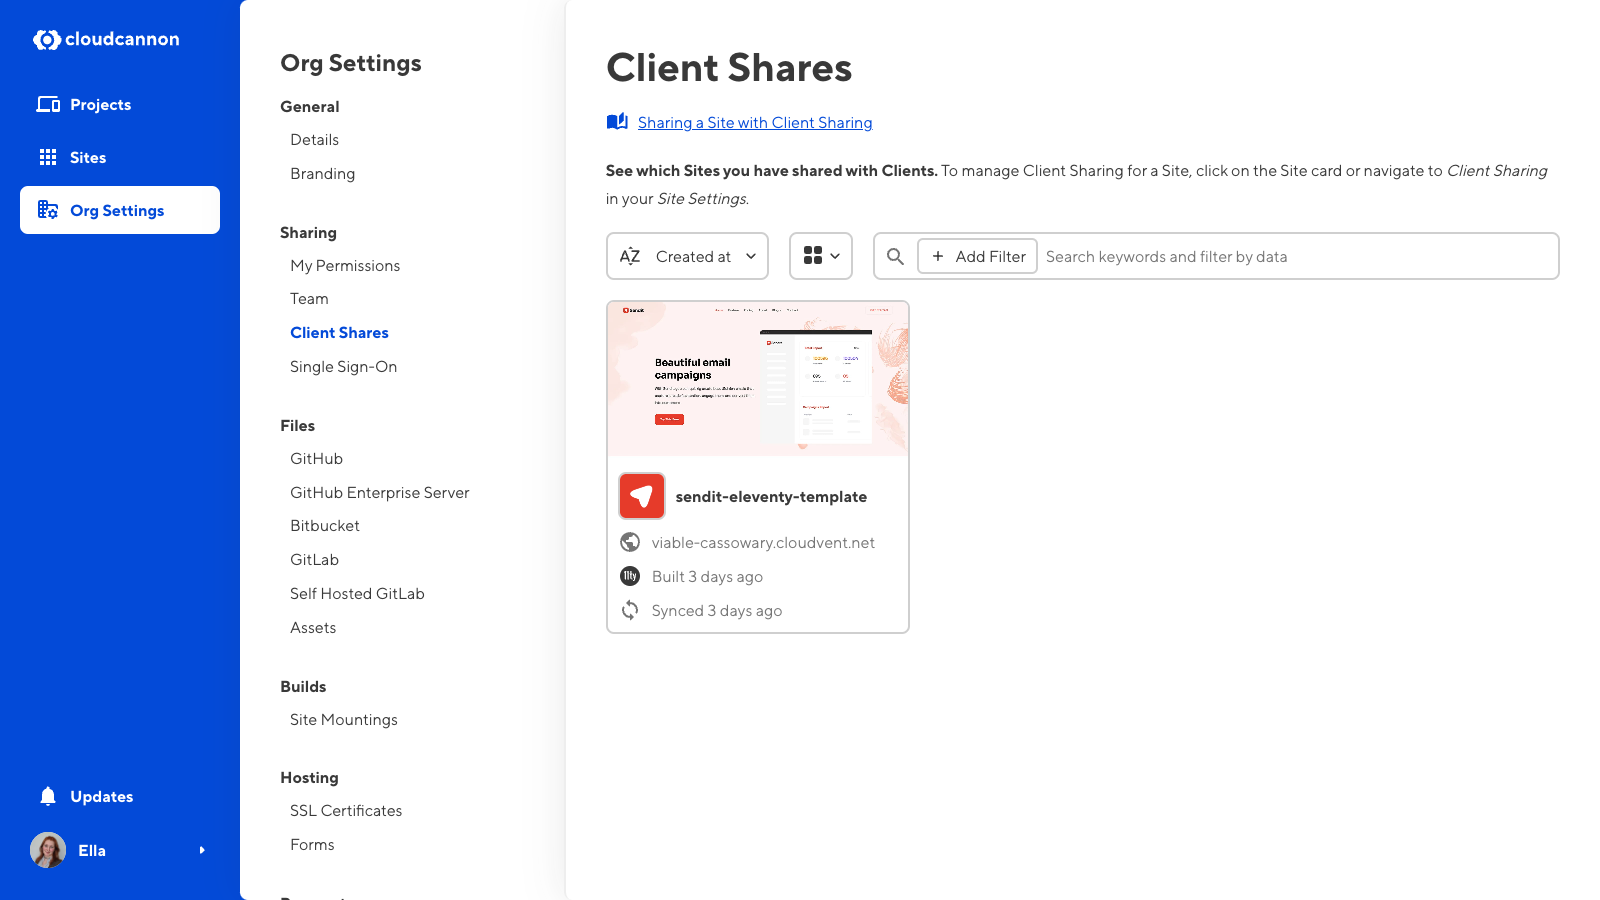 A screenshot of the Client Shares page shows one Site with Client Sharing enabled.